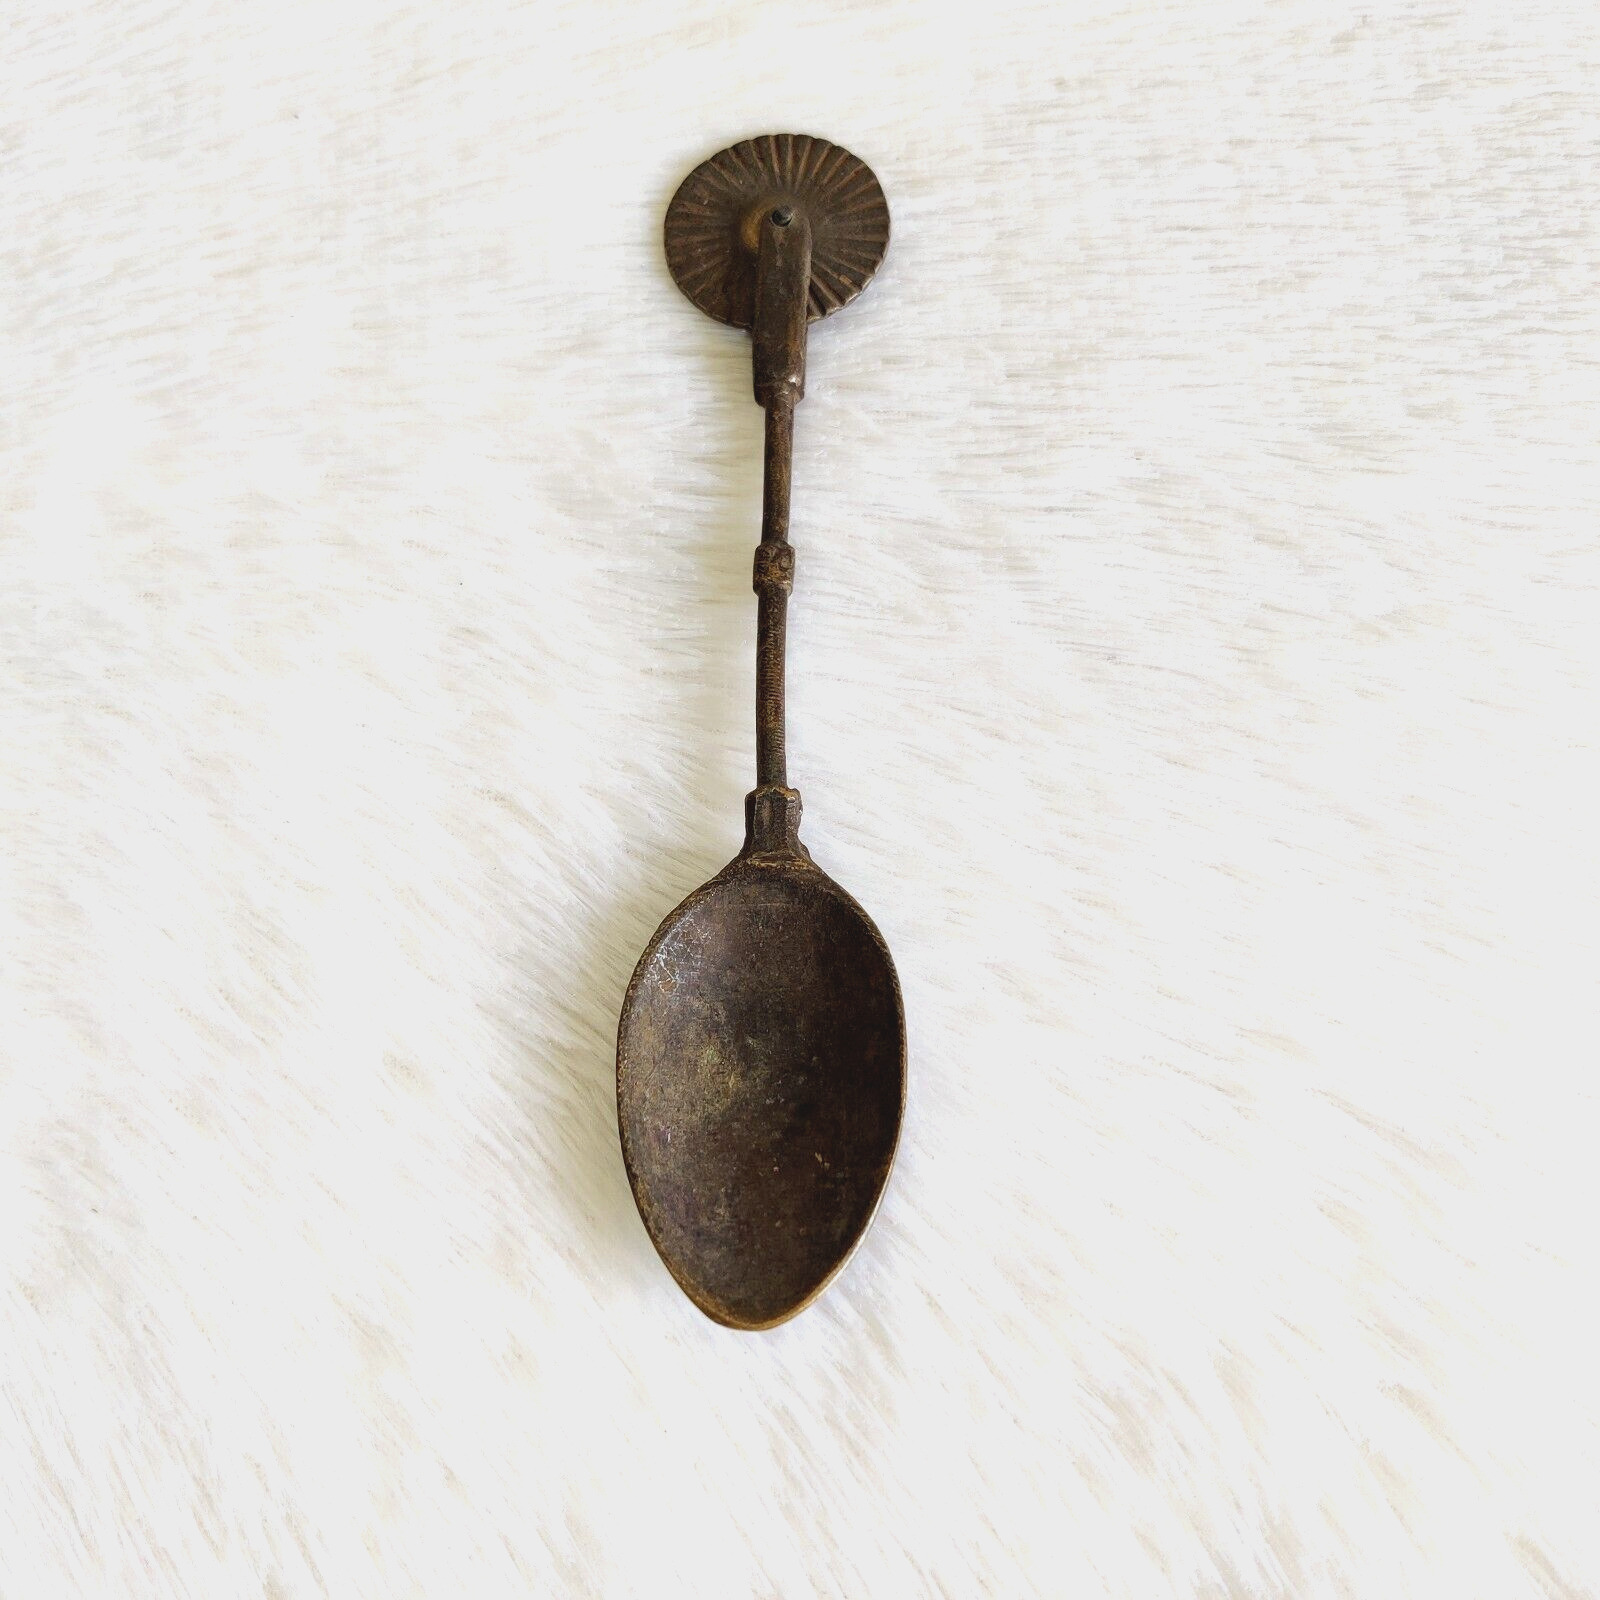 1930s Vintage Brass Cutter & Spoon Multi Purpose Kitchenware Collectible Old 94